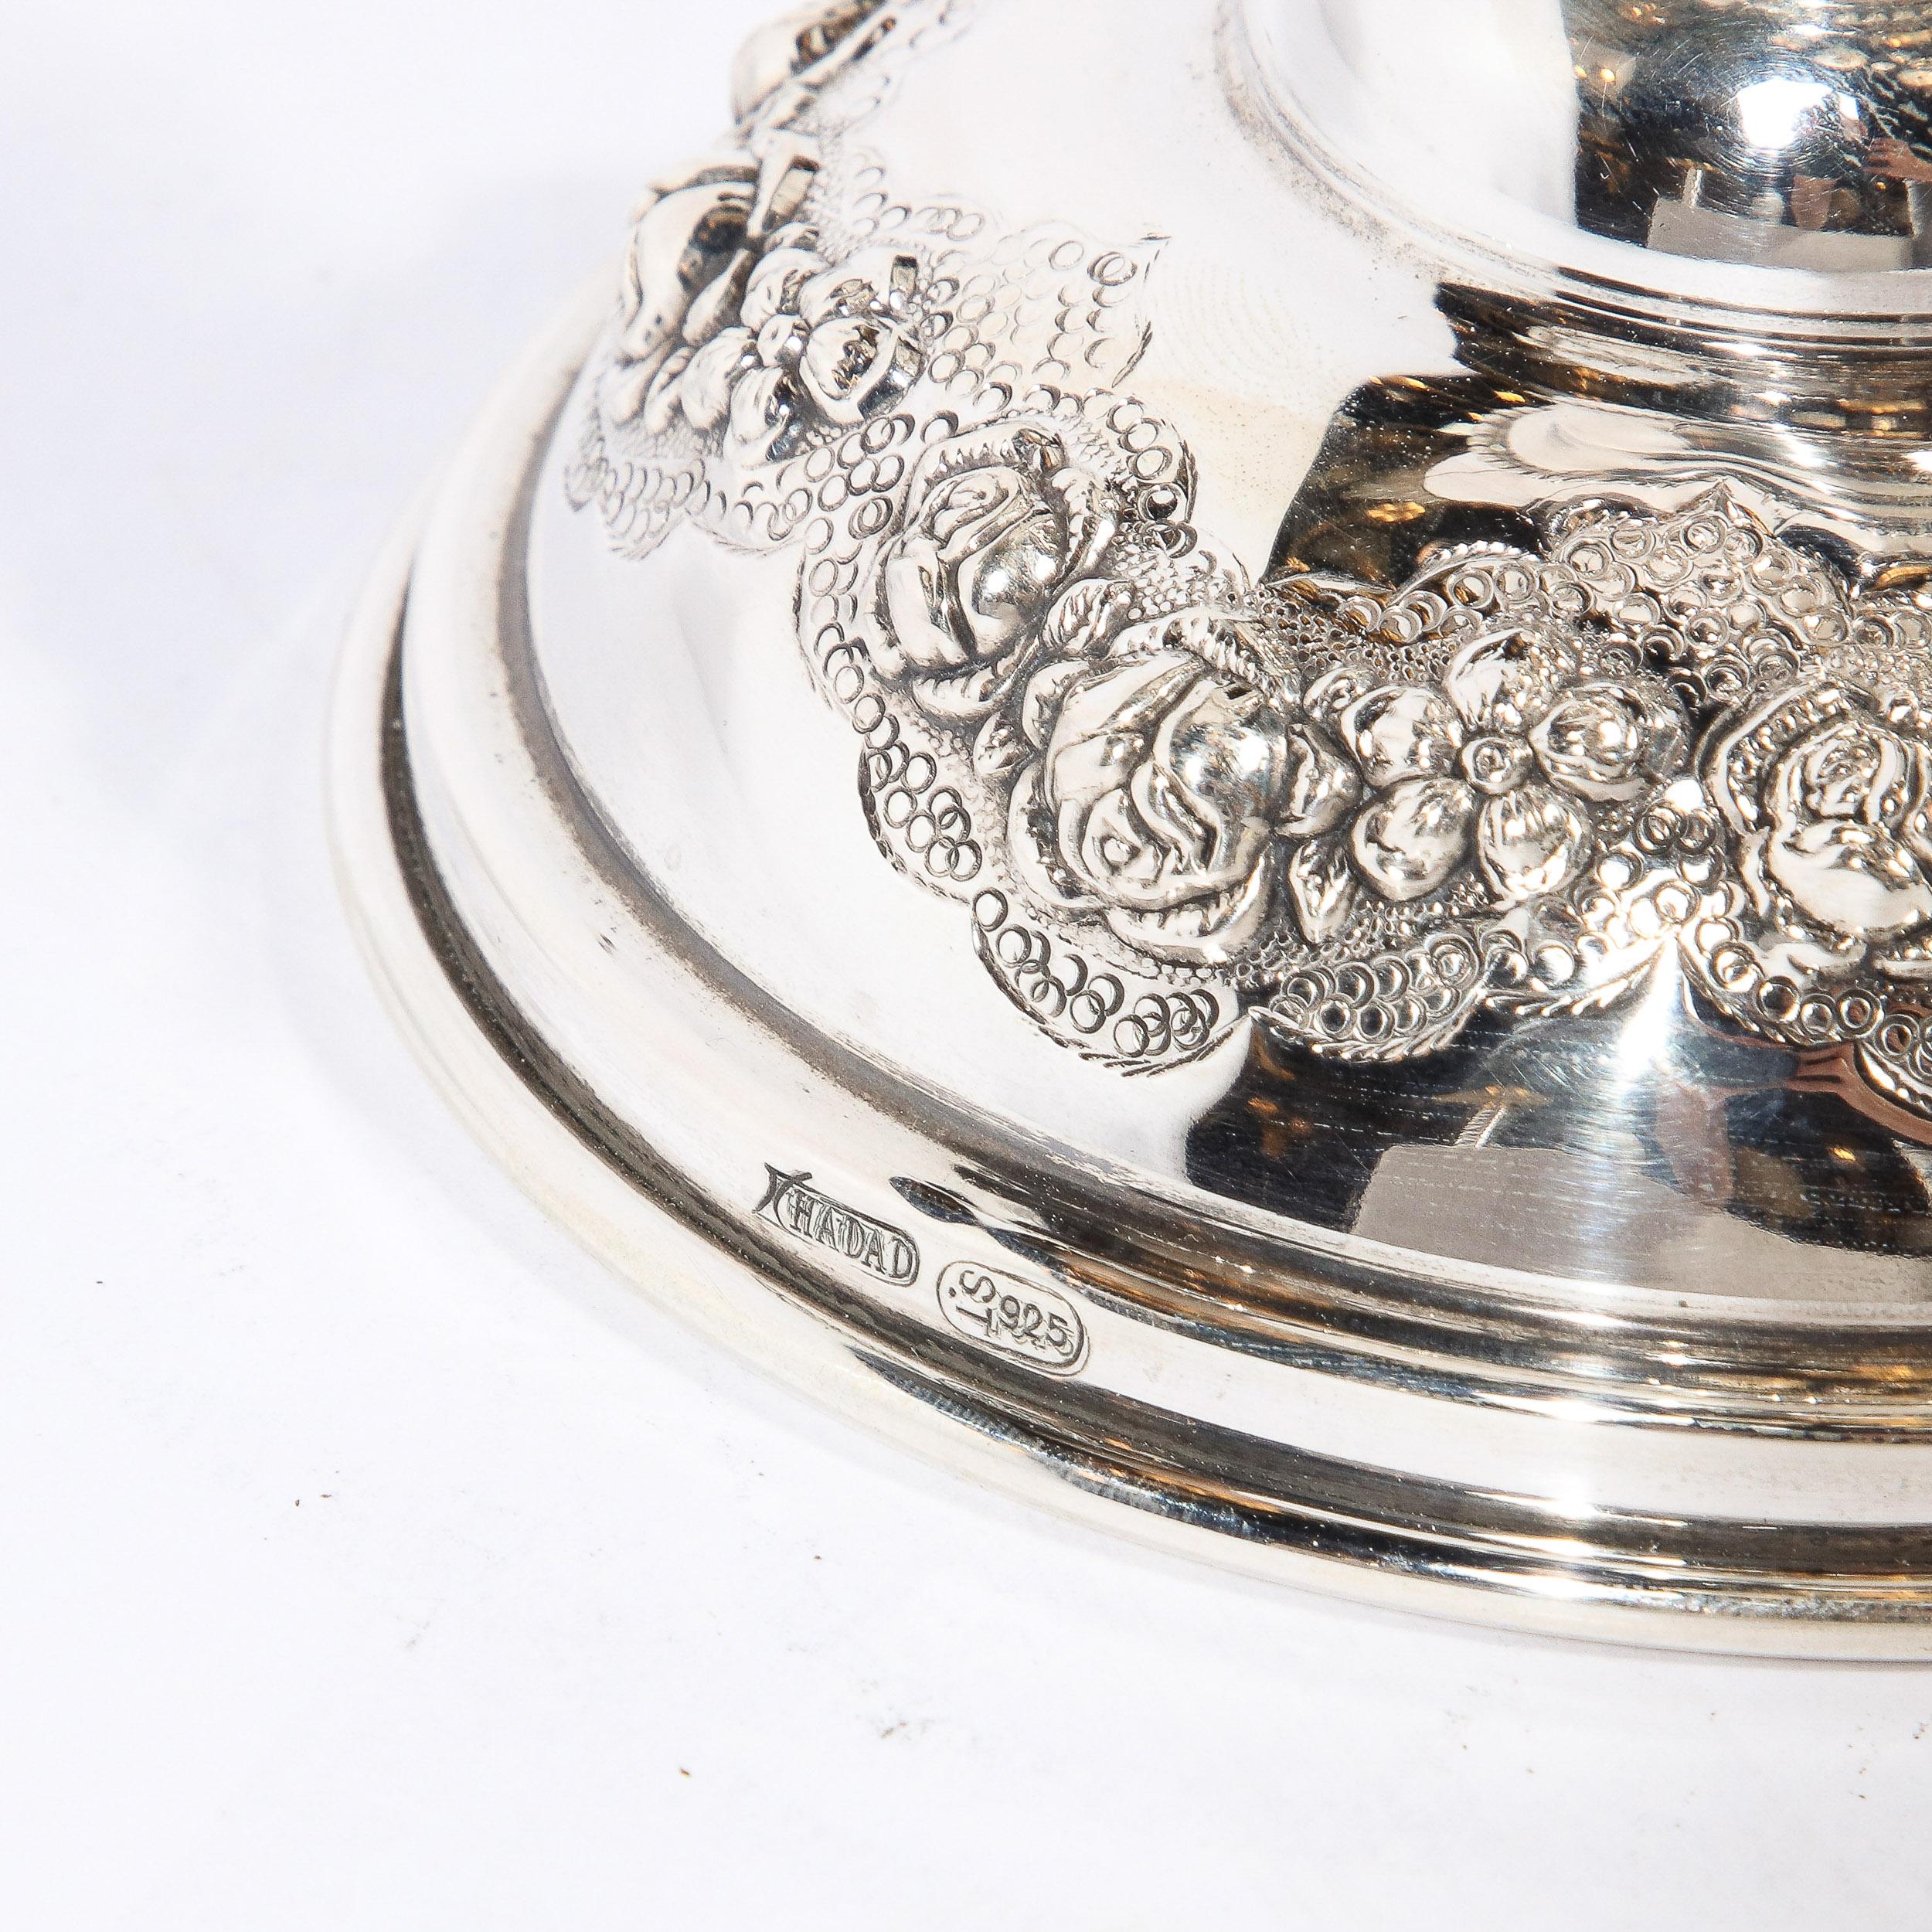 Monumental Sterling  Kiddish Goblet with Repousse Designs  by Hadad Brothers For Sale 2